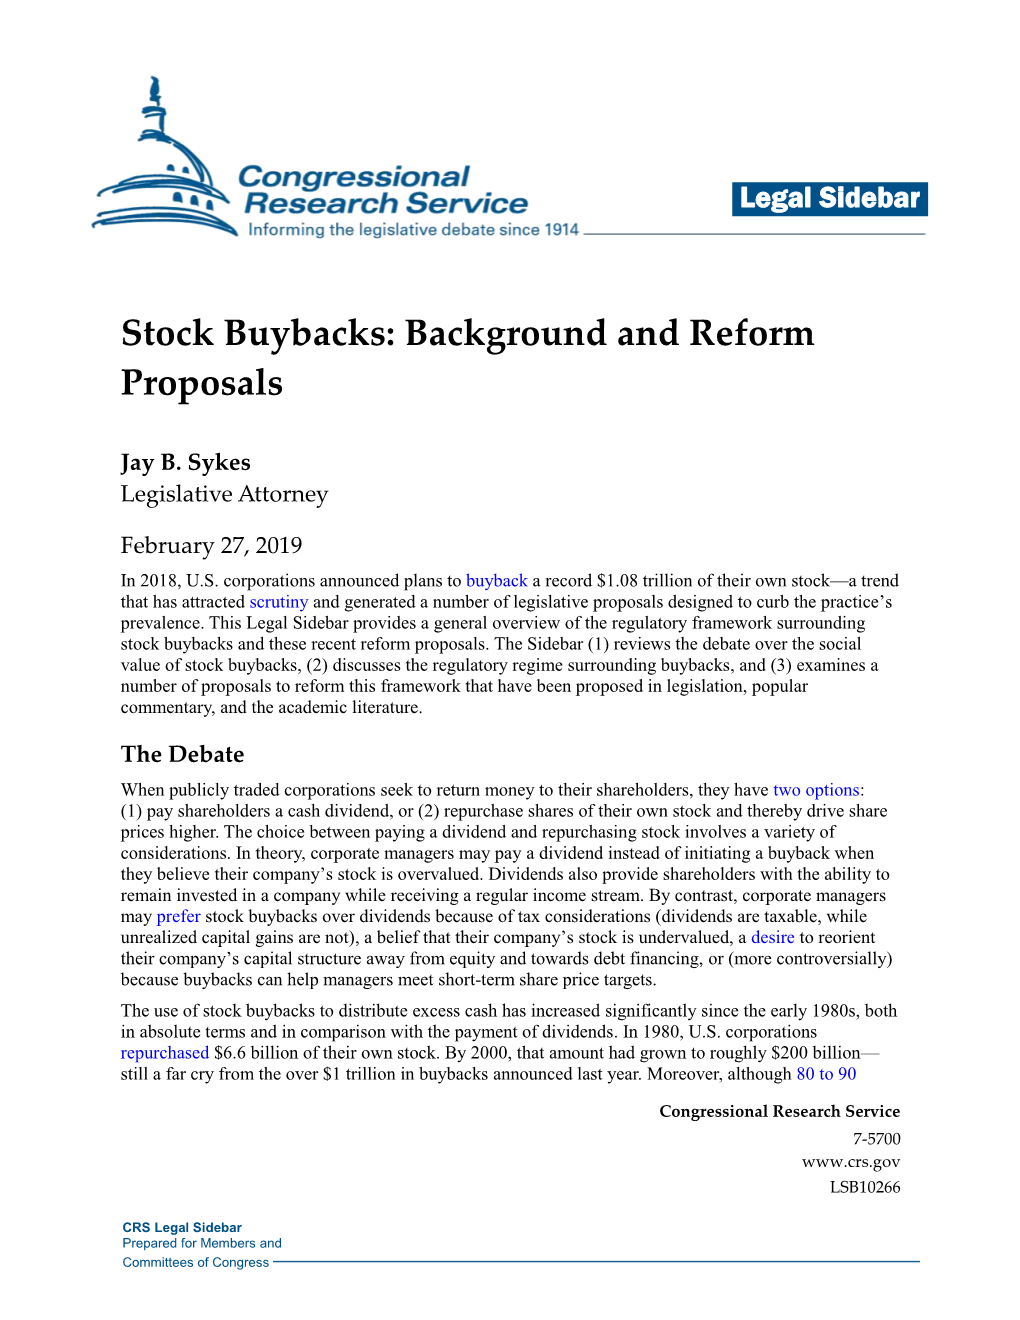 Stock Buybacks: Background and Reform Proposals